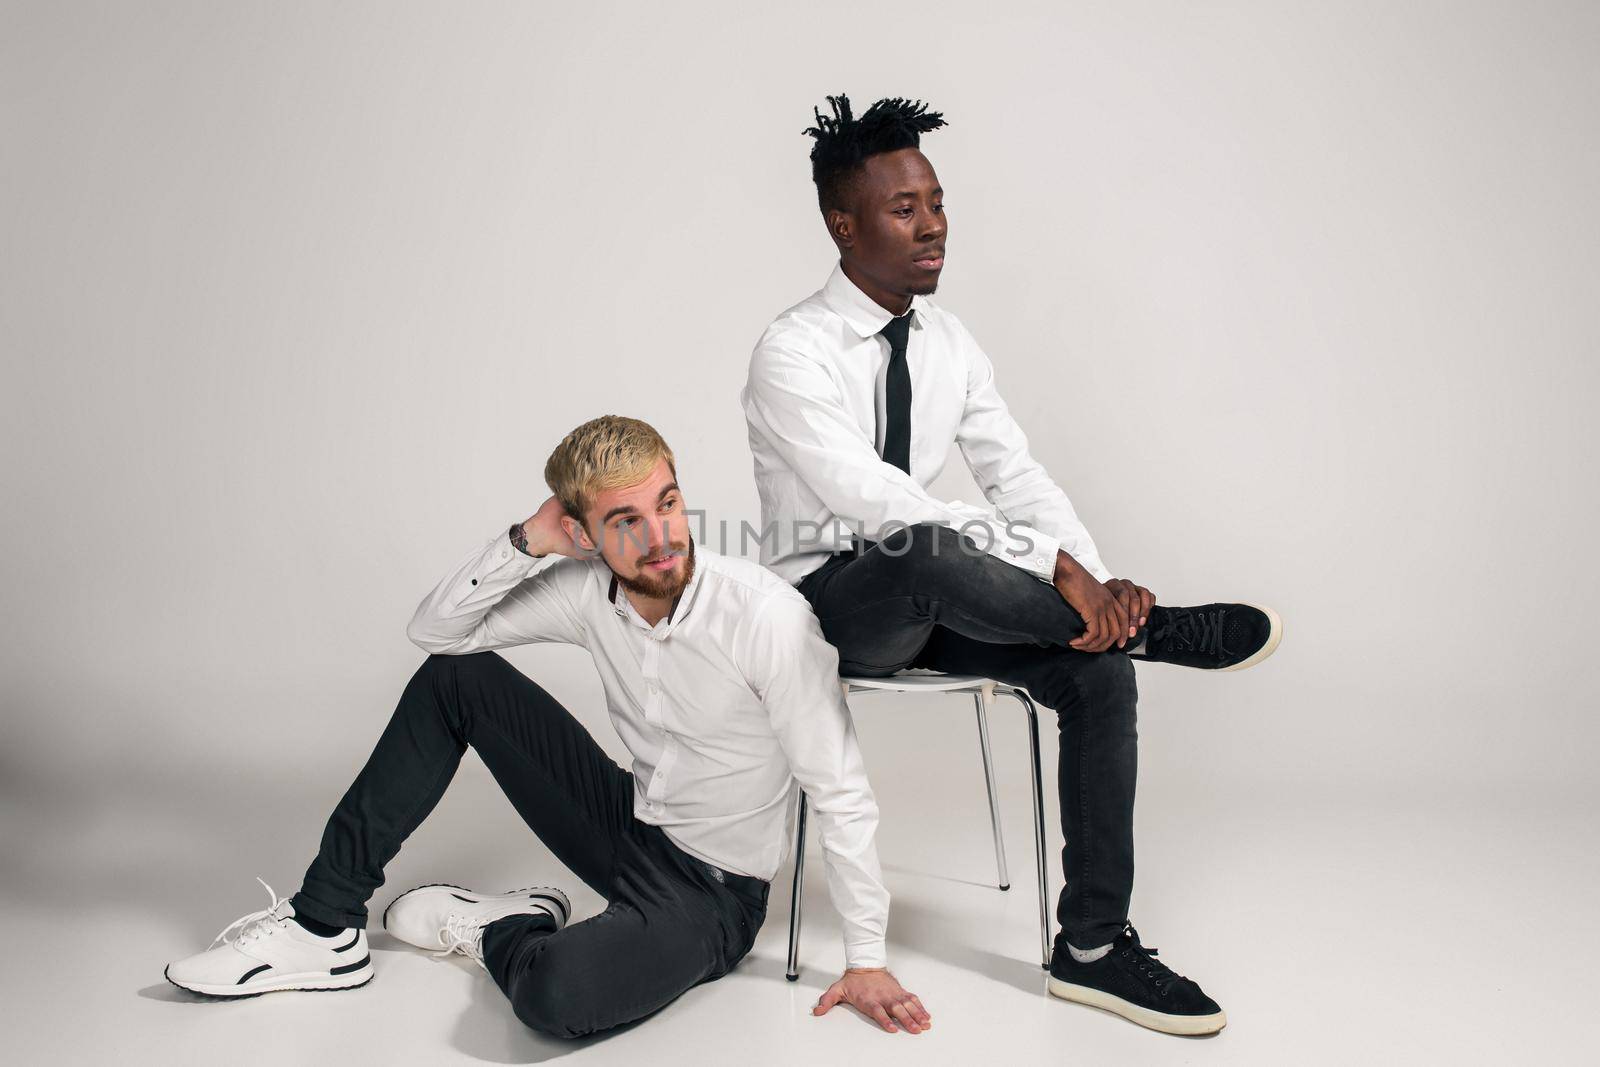 Joyful relaxed african and caucasian boys in white and black office clothes laughing and posing at white studio background with copy space. One man is sitting on the floor, the second is sitting on a chair